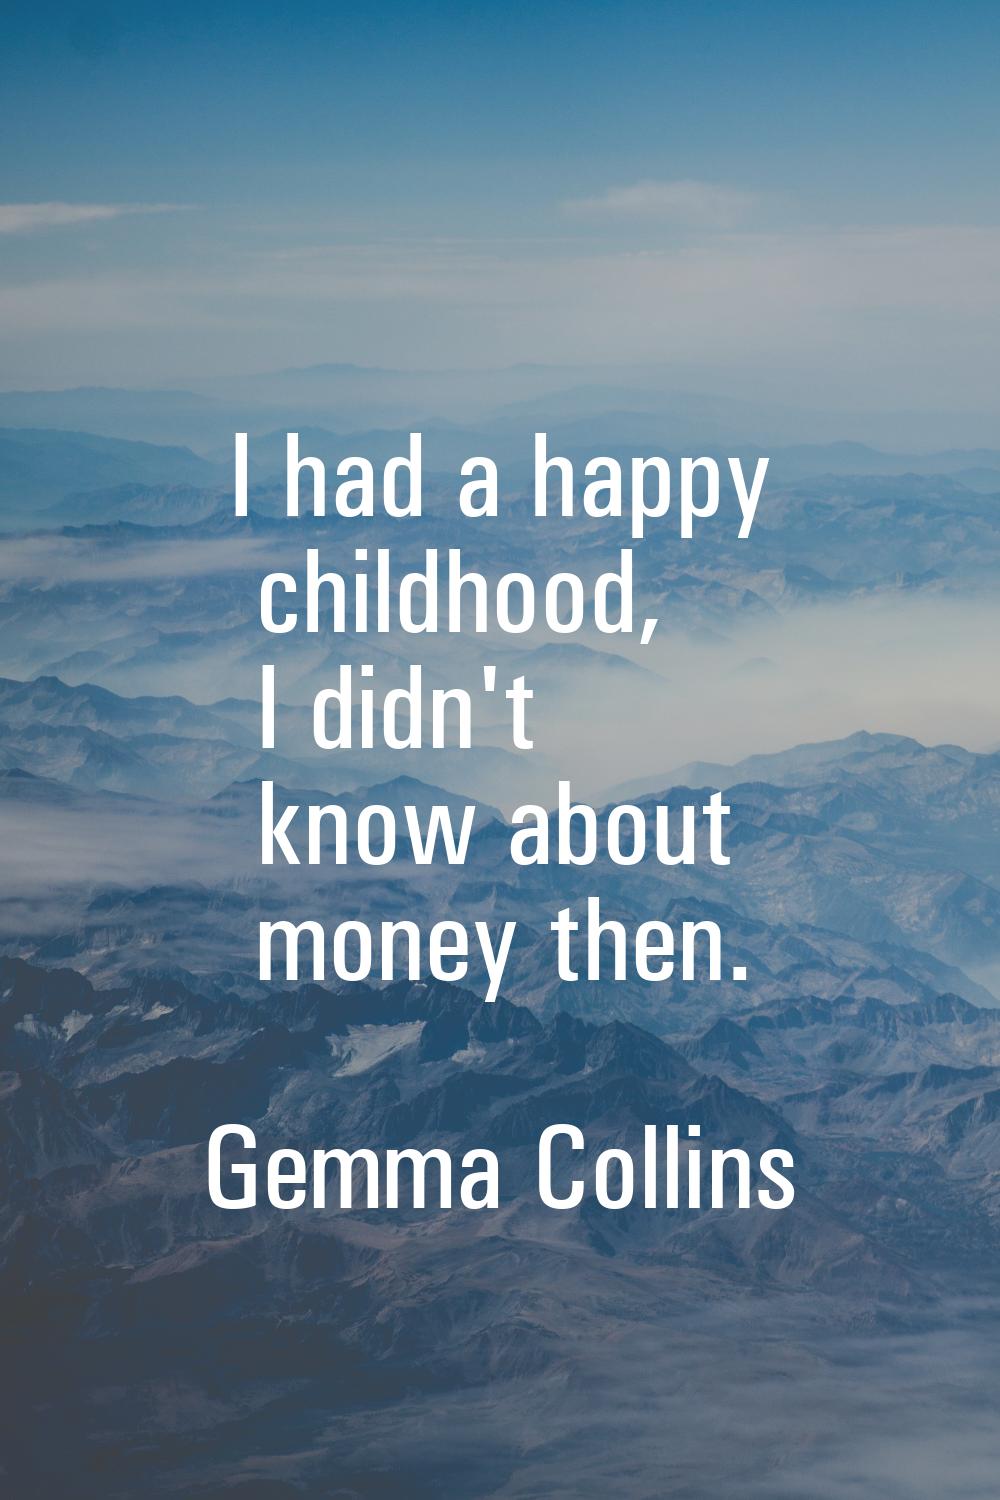 I had a happy childhood, I didn't know about money then.